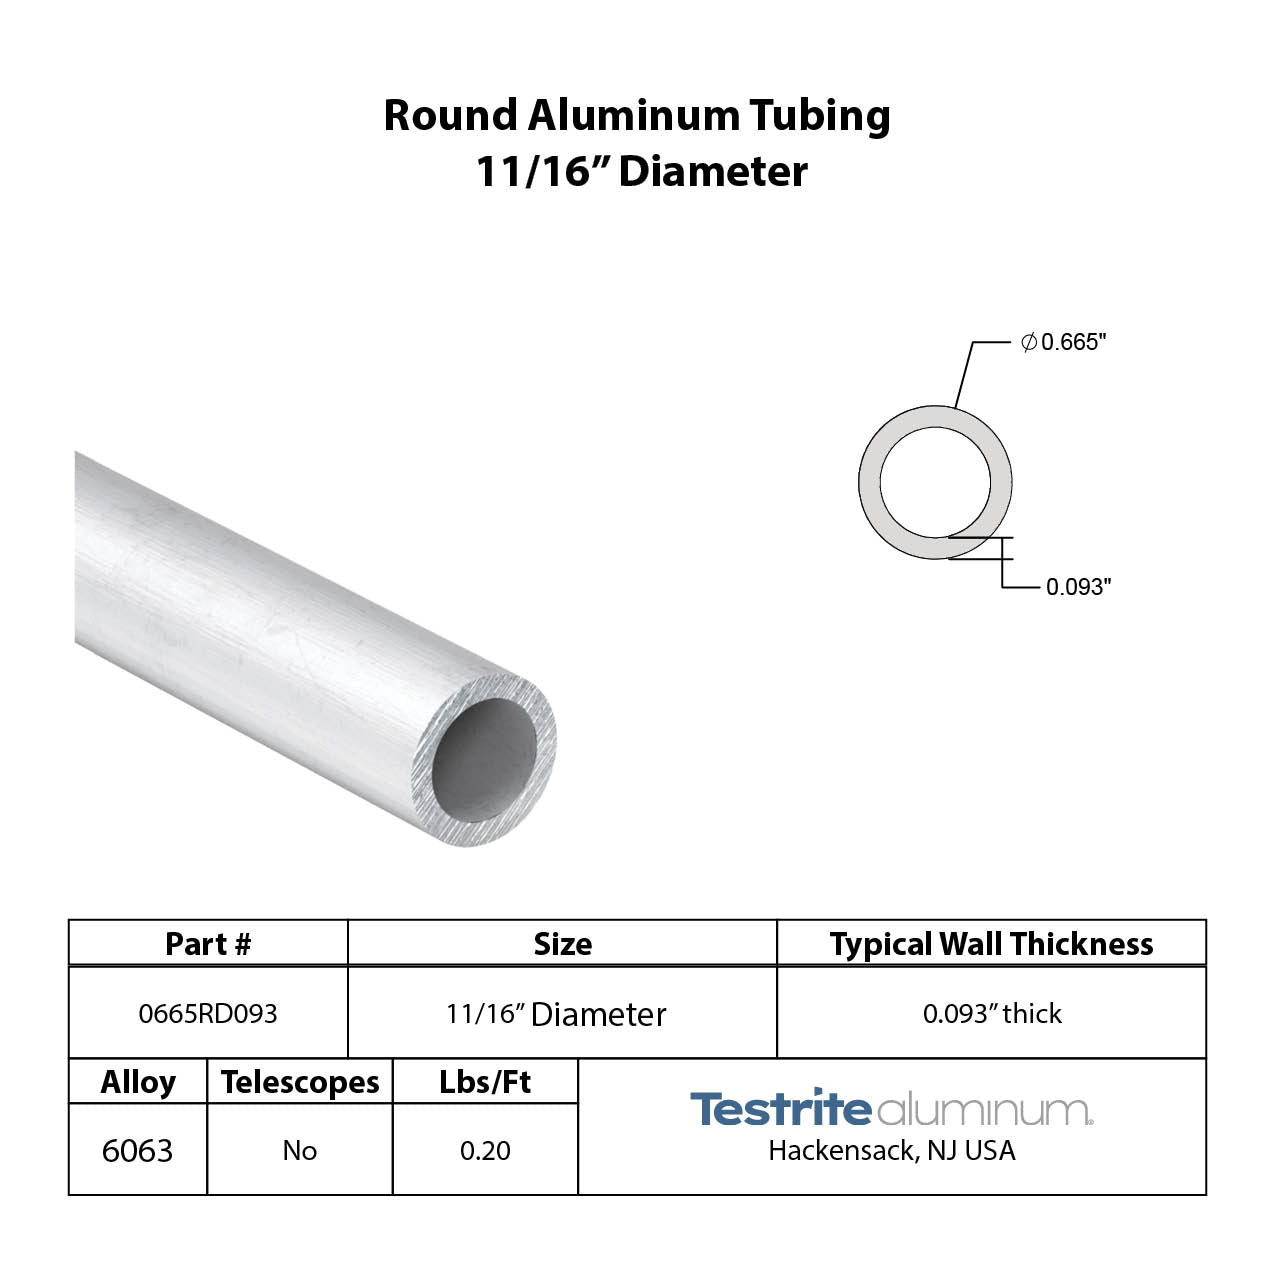 Spec sheet for approximately 0.6875" x .090" Aluminum Round Tube, actual size 0.665" Diameter x .093" Wall, nearly a 11/16" x 3/32" Wall round aluminum tube, spec card includes lbs per ft